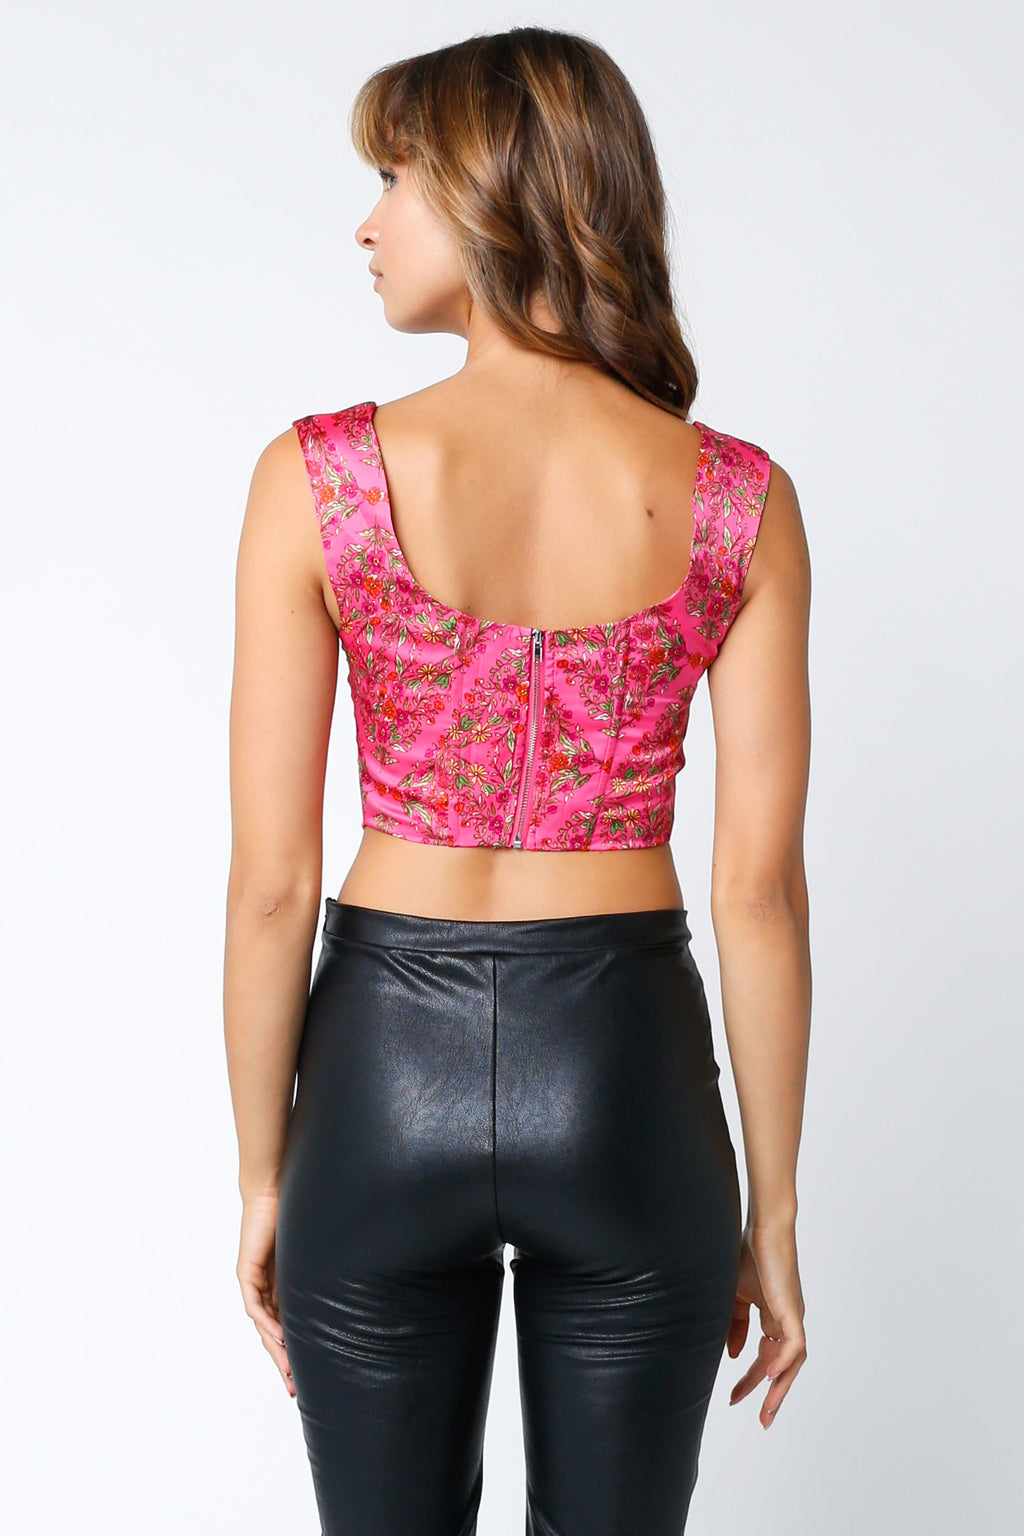 The City Pink Corset Style Top FINAL SALE